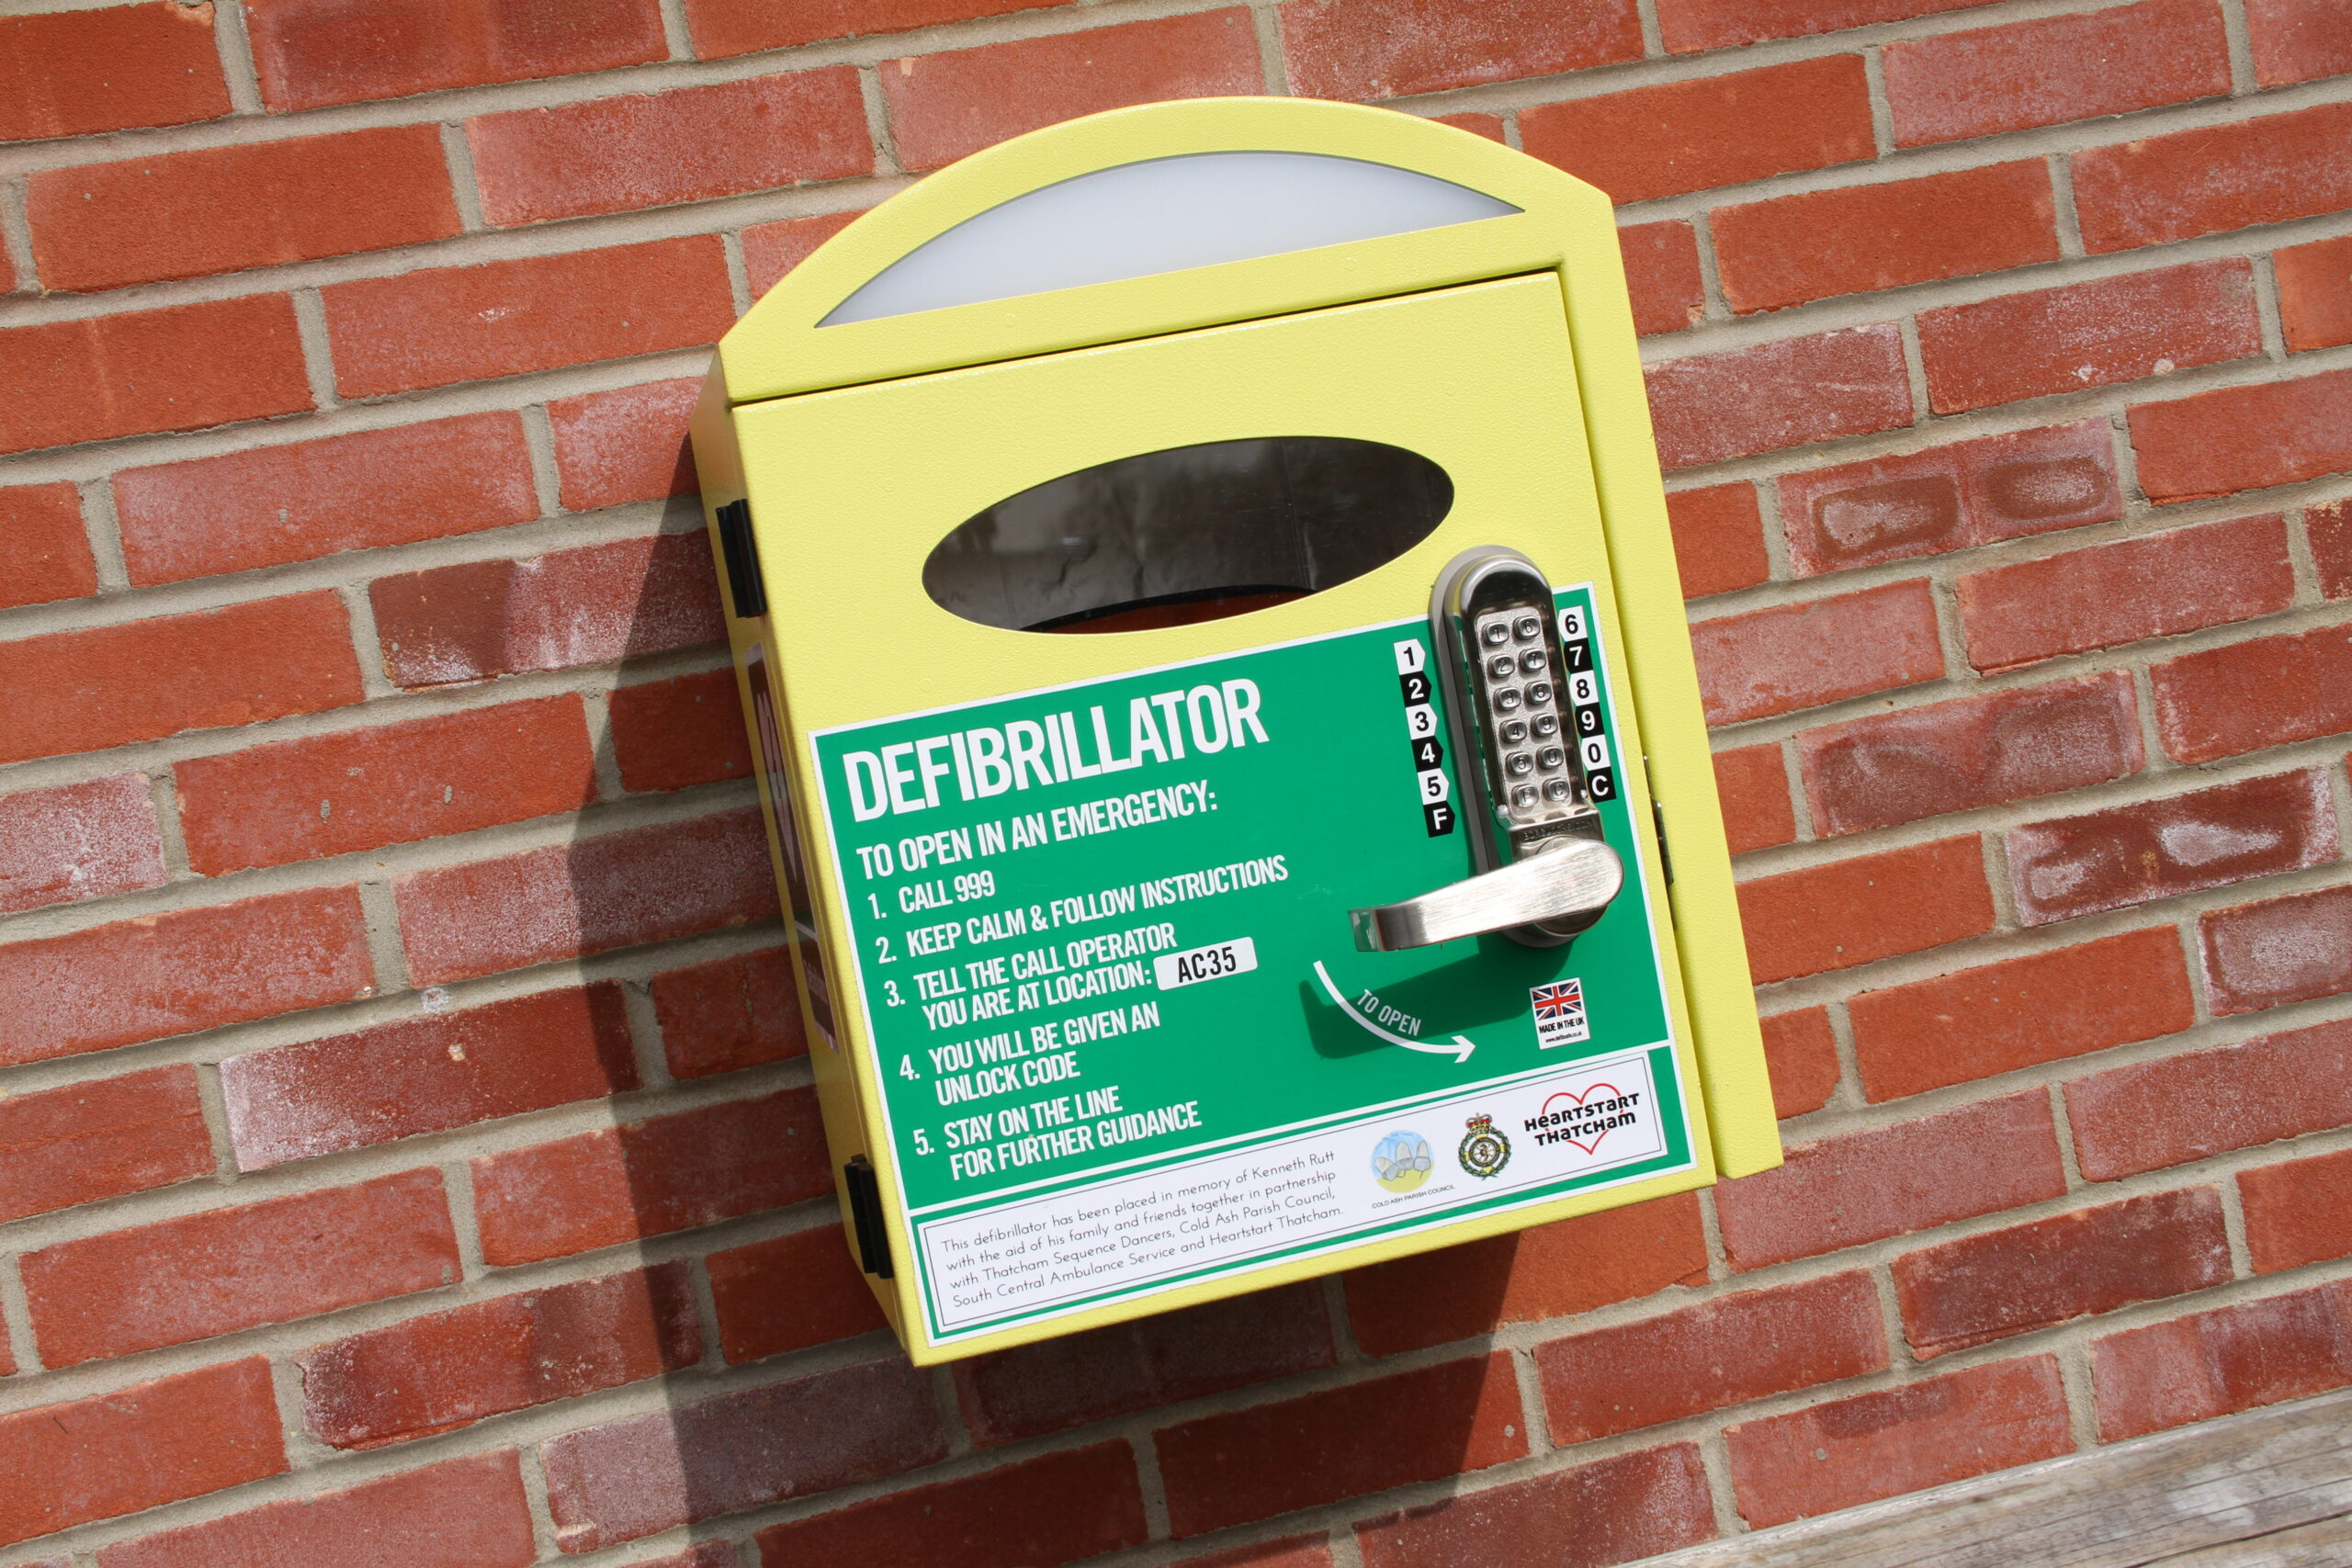 Cabinet containing publicly accessible defibrillator fixed to an outside wall